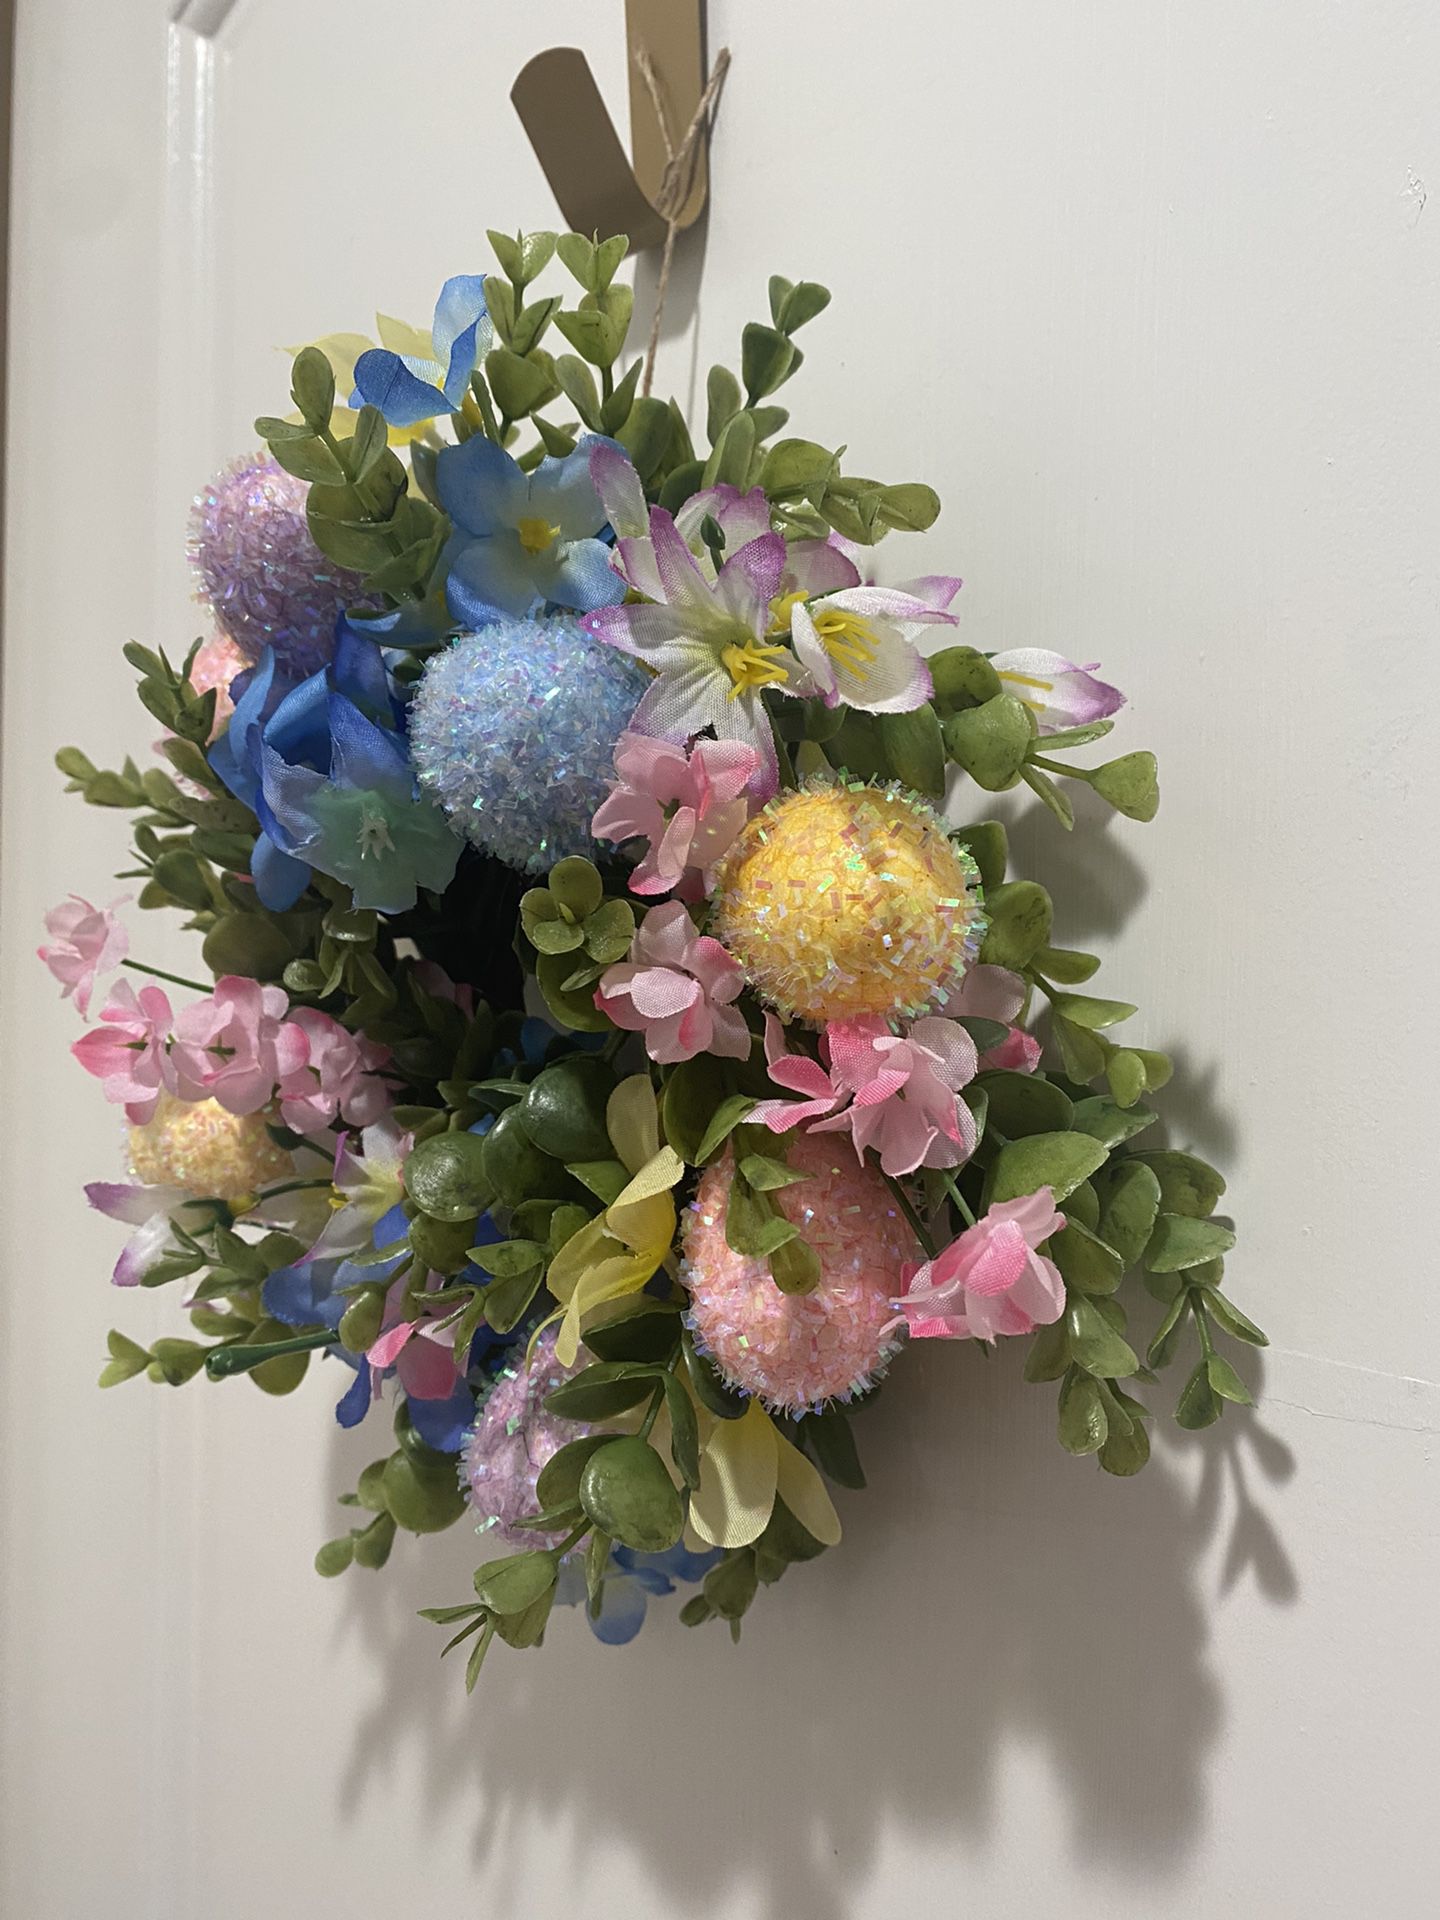 Easter Egg And Flowers Mini Wreath 10x10 Perfect For Indoors!